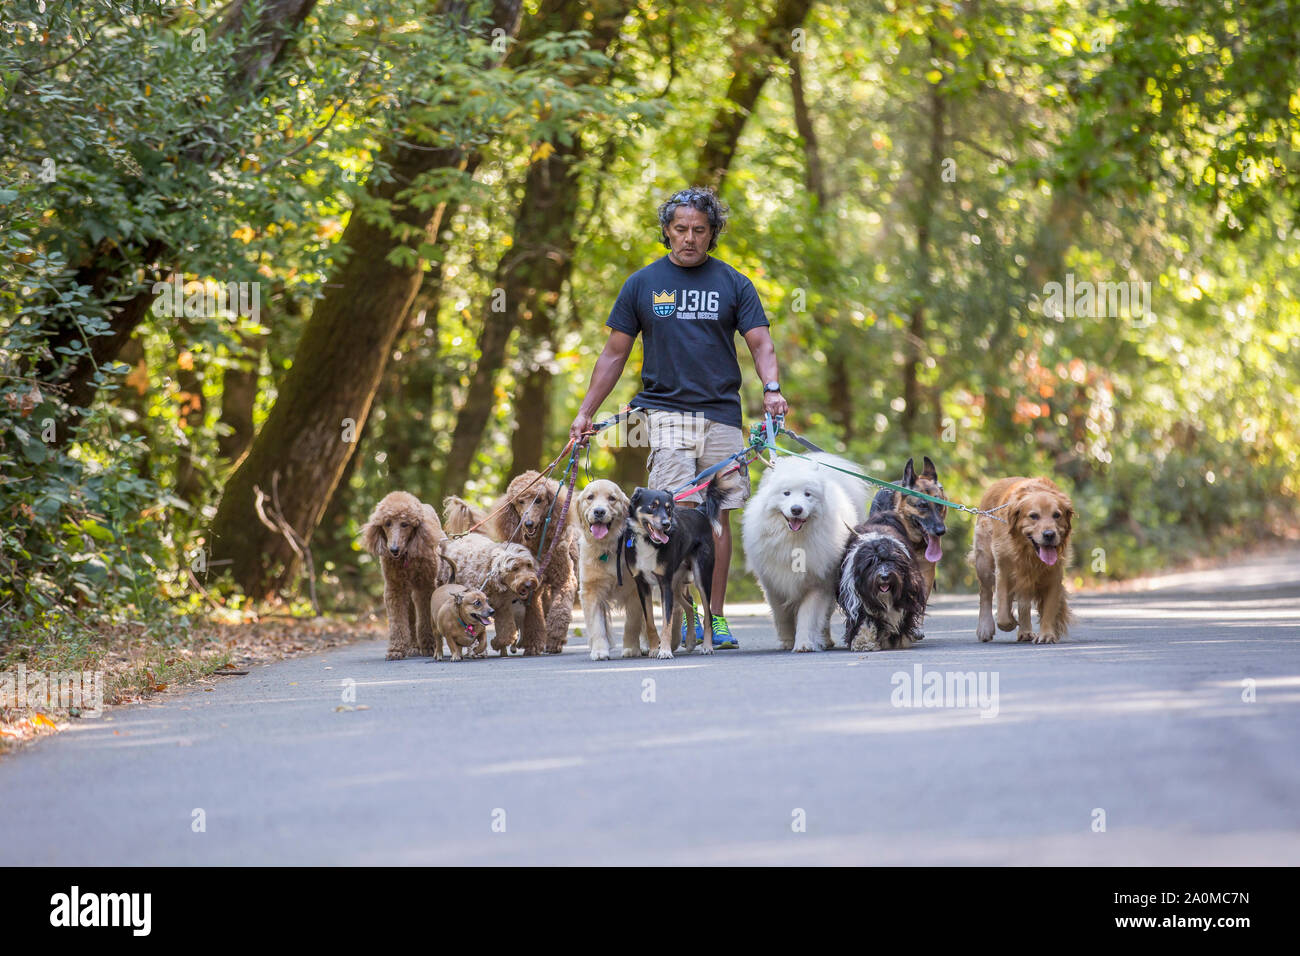 Professional dog walker and trainer Juan Carlos Zuniga taking dogs of various breeds for a walk in a park. Stock Photo